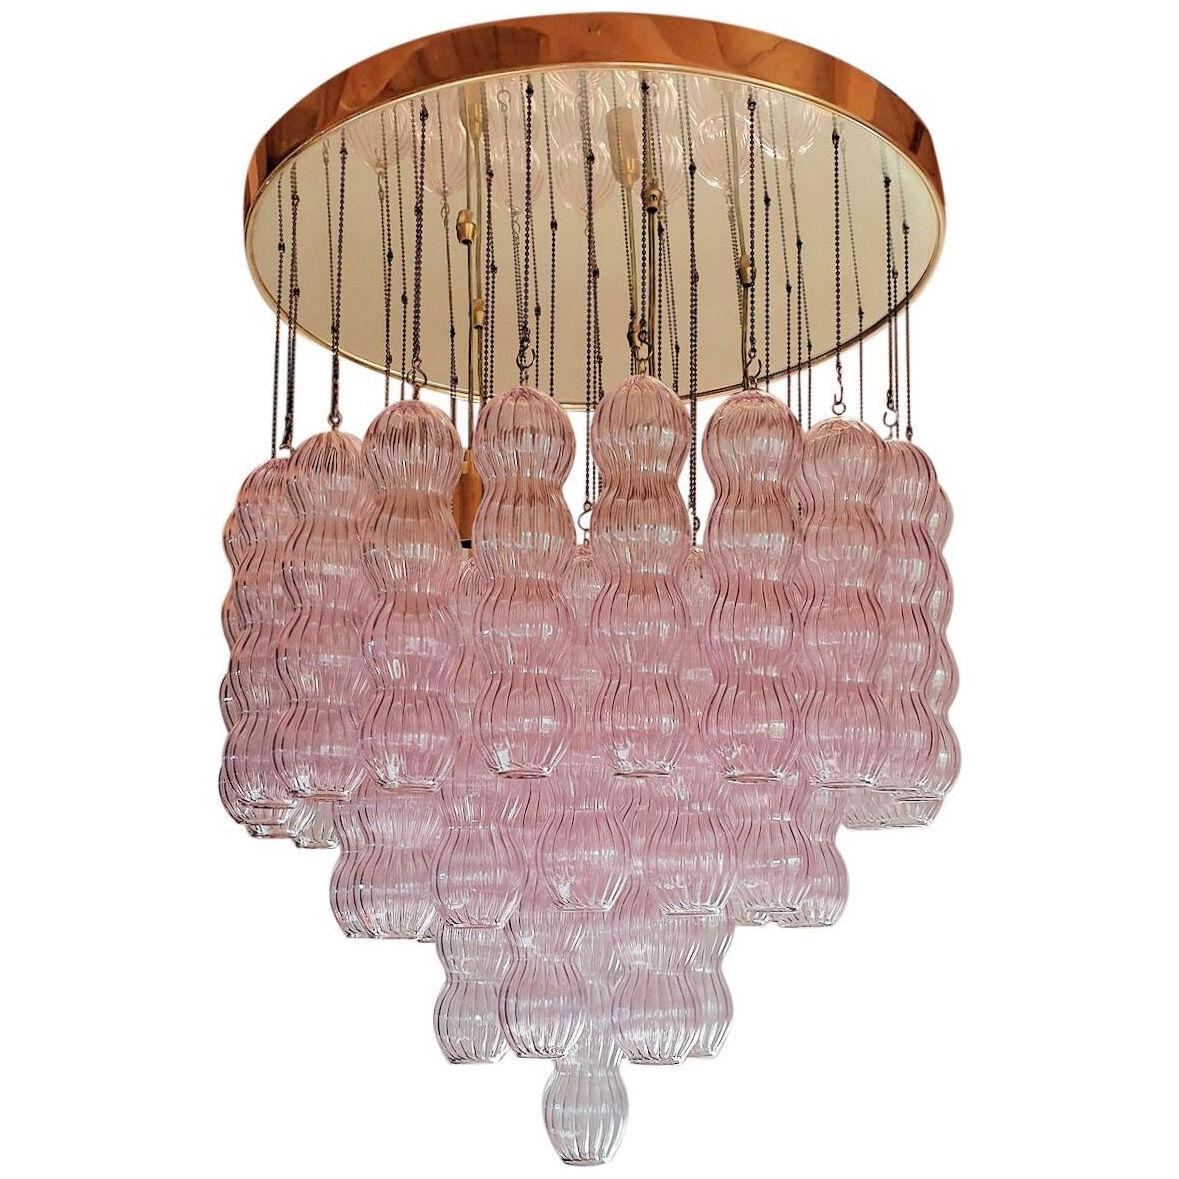 Large Murano Glass Flush-Mount chandelier by Mazzega - a pair